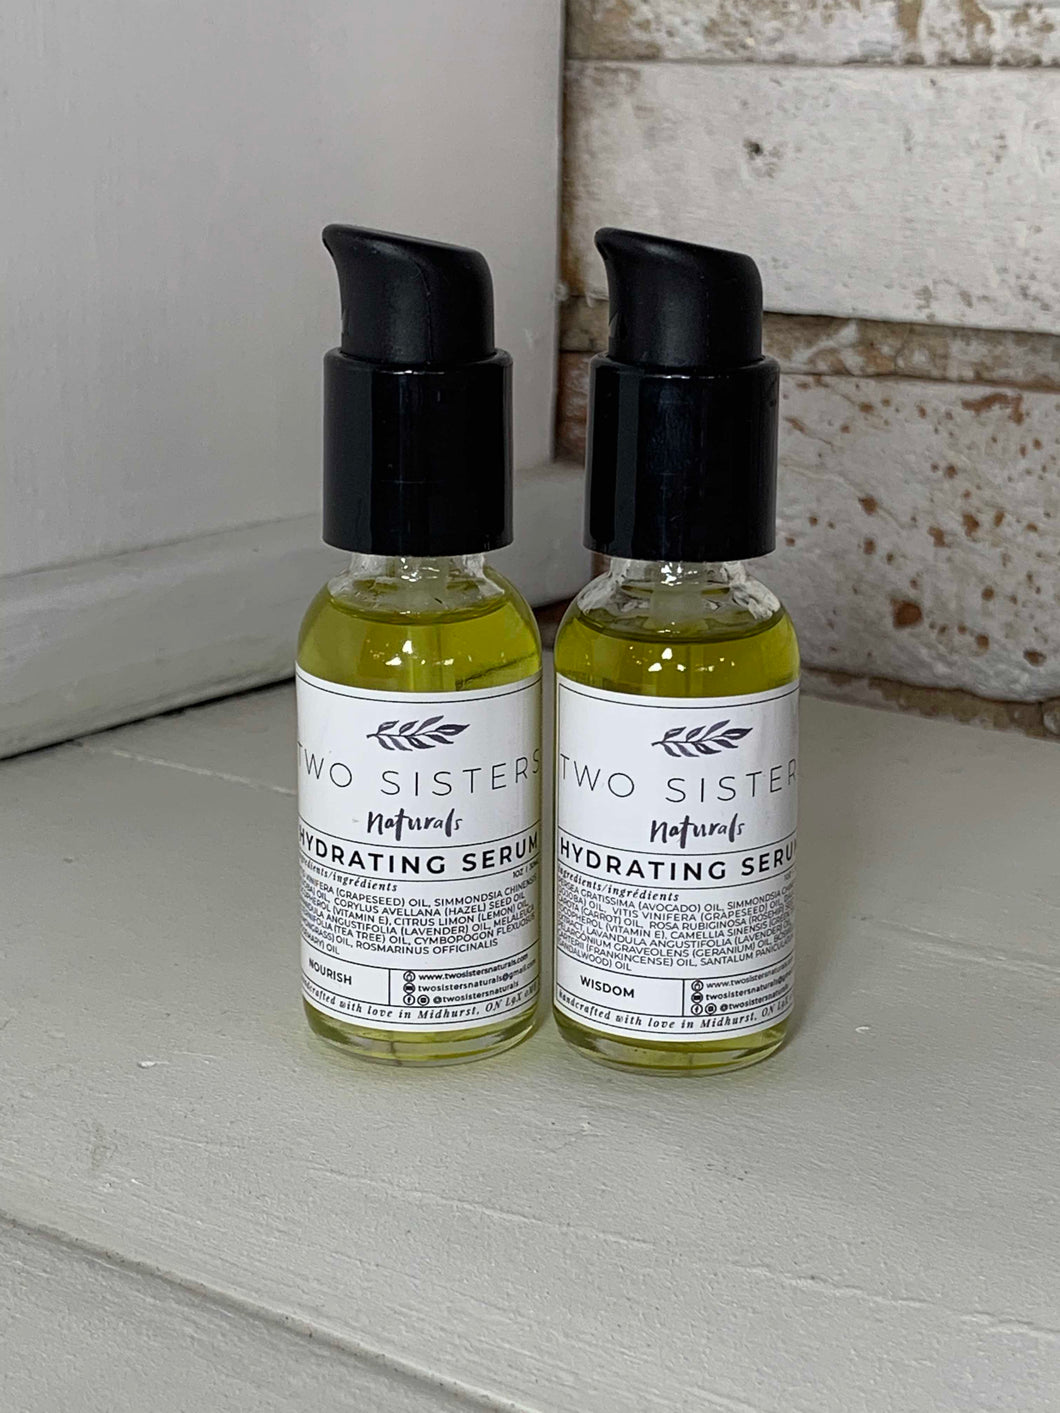 Two Sisters Naturals Hydrating Serum